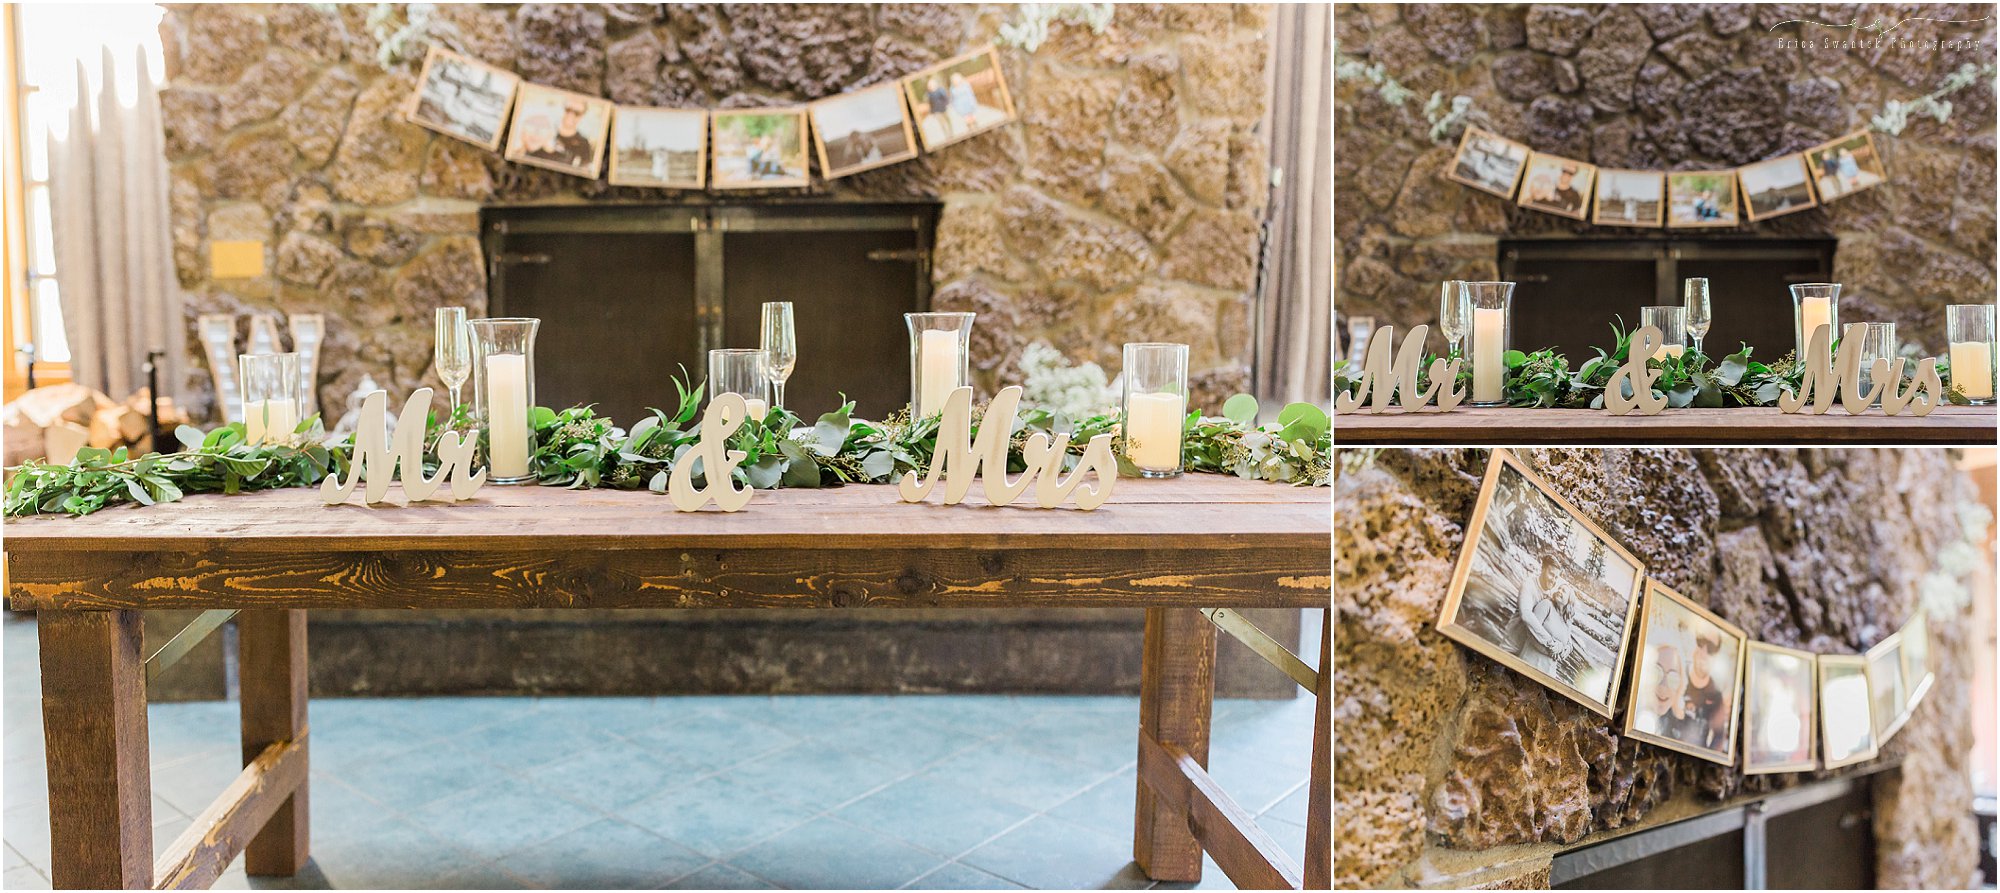 A sweetheart farm table in front of the amazing hearth at Aspen Hall in Bend, Oregon adds to the vintage rustic chic Bend wedding theme. | Erica Swantek Photography